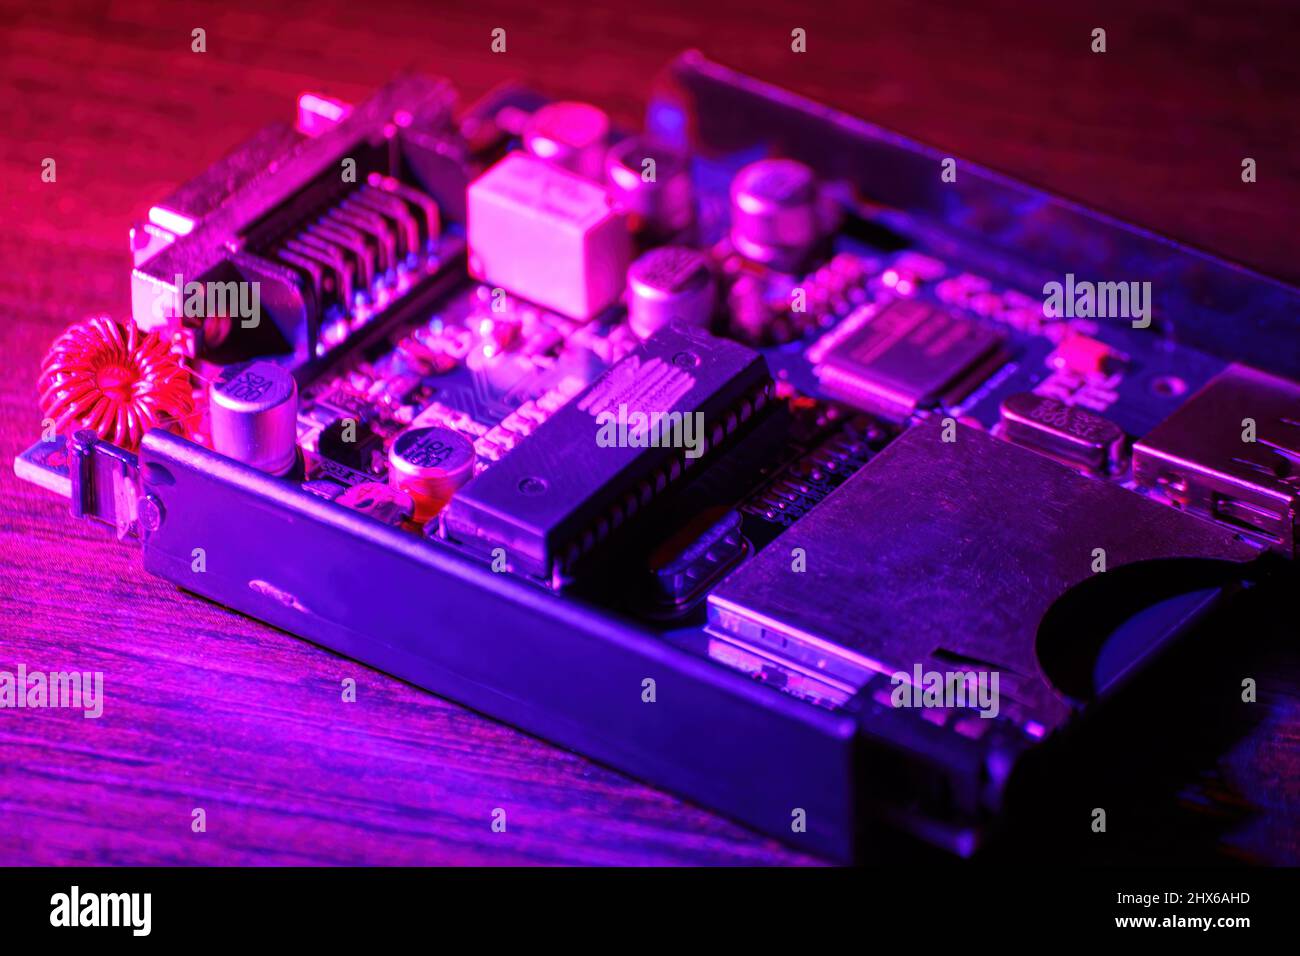 Small PCB and microcircuit computer on the table in the purple neon lights. Abstract technologies and IT backgrounds Stock Photo